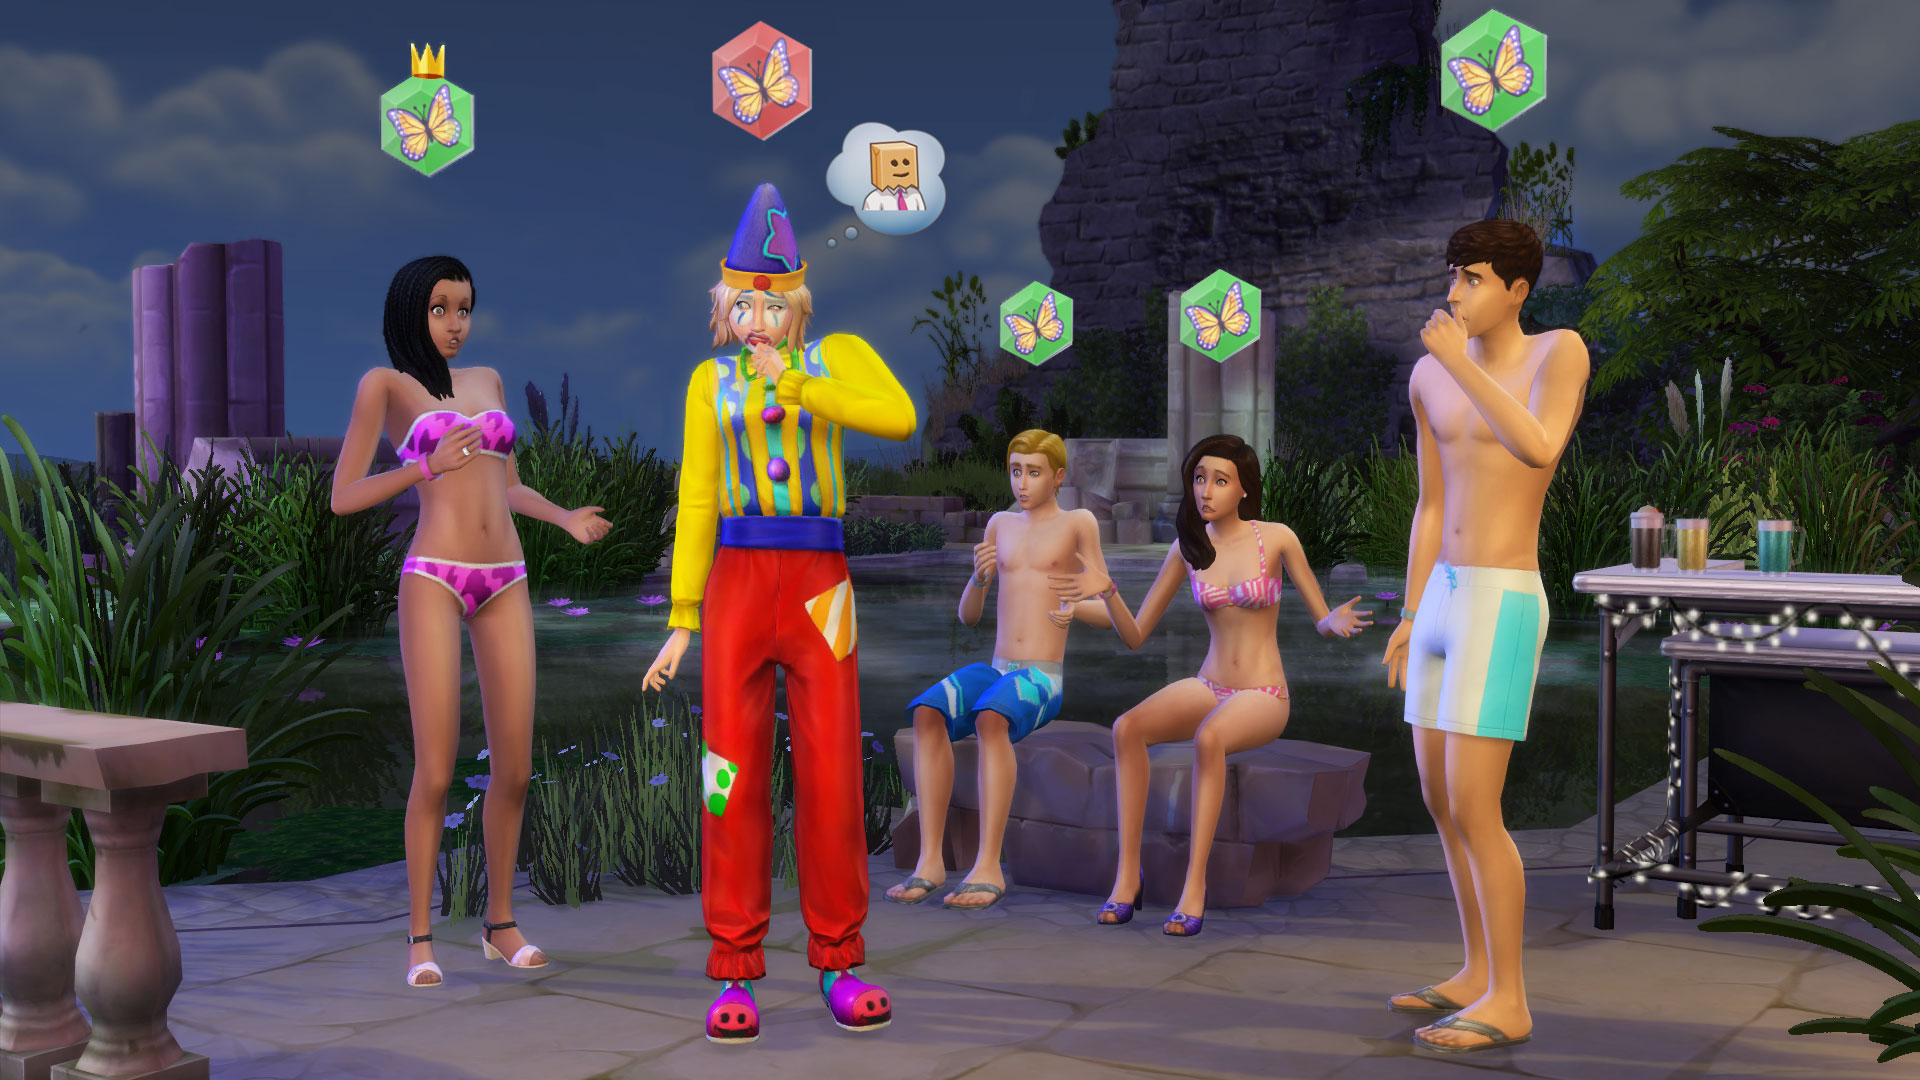 The Sims 4: Get Together - screenshot 5